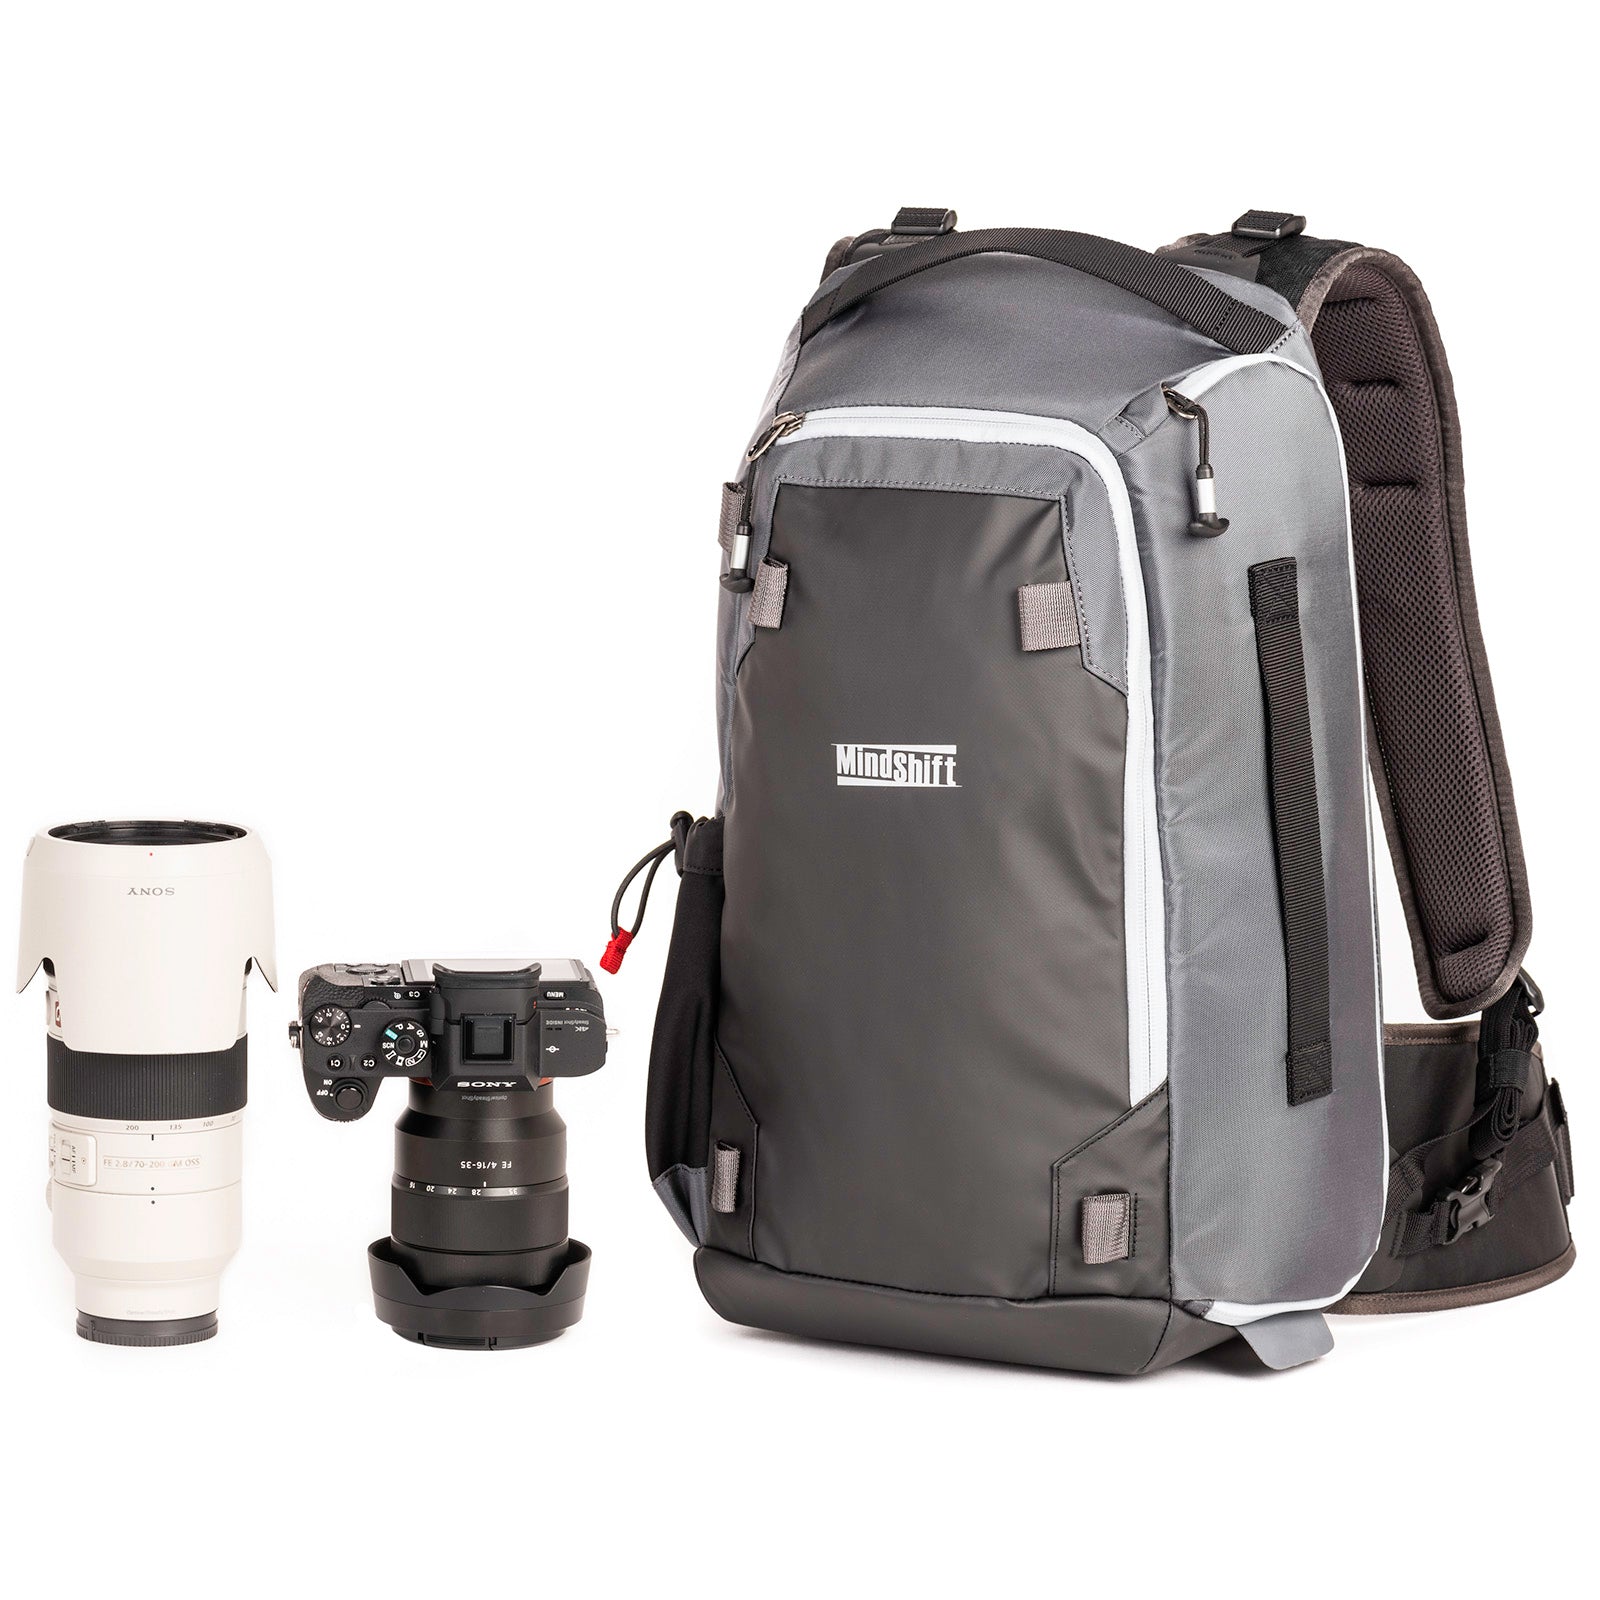 Photocross 13 Camera Backpack Weatherproof Pack Fits 13 Laptop Think Tank Photo